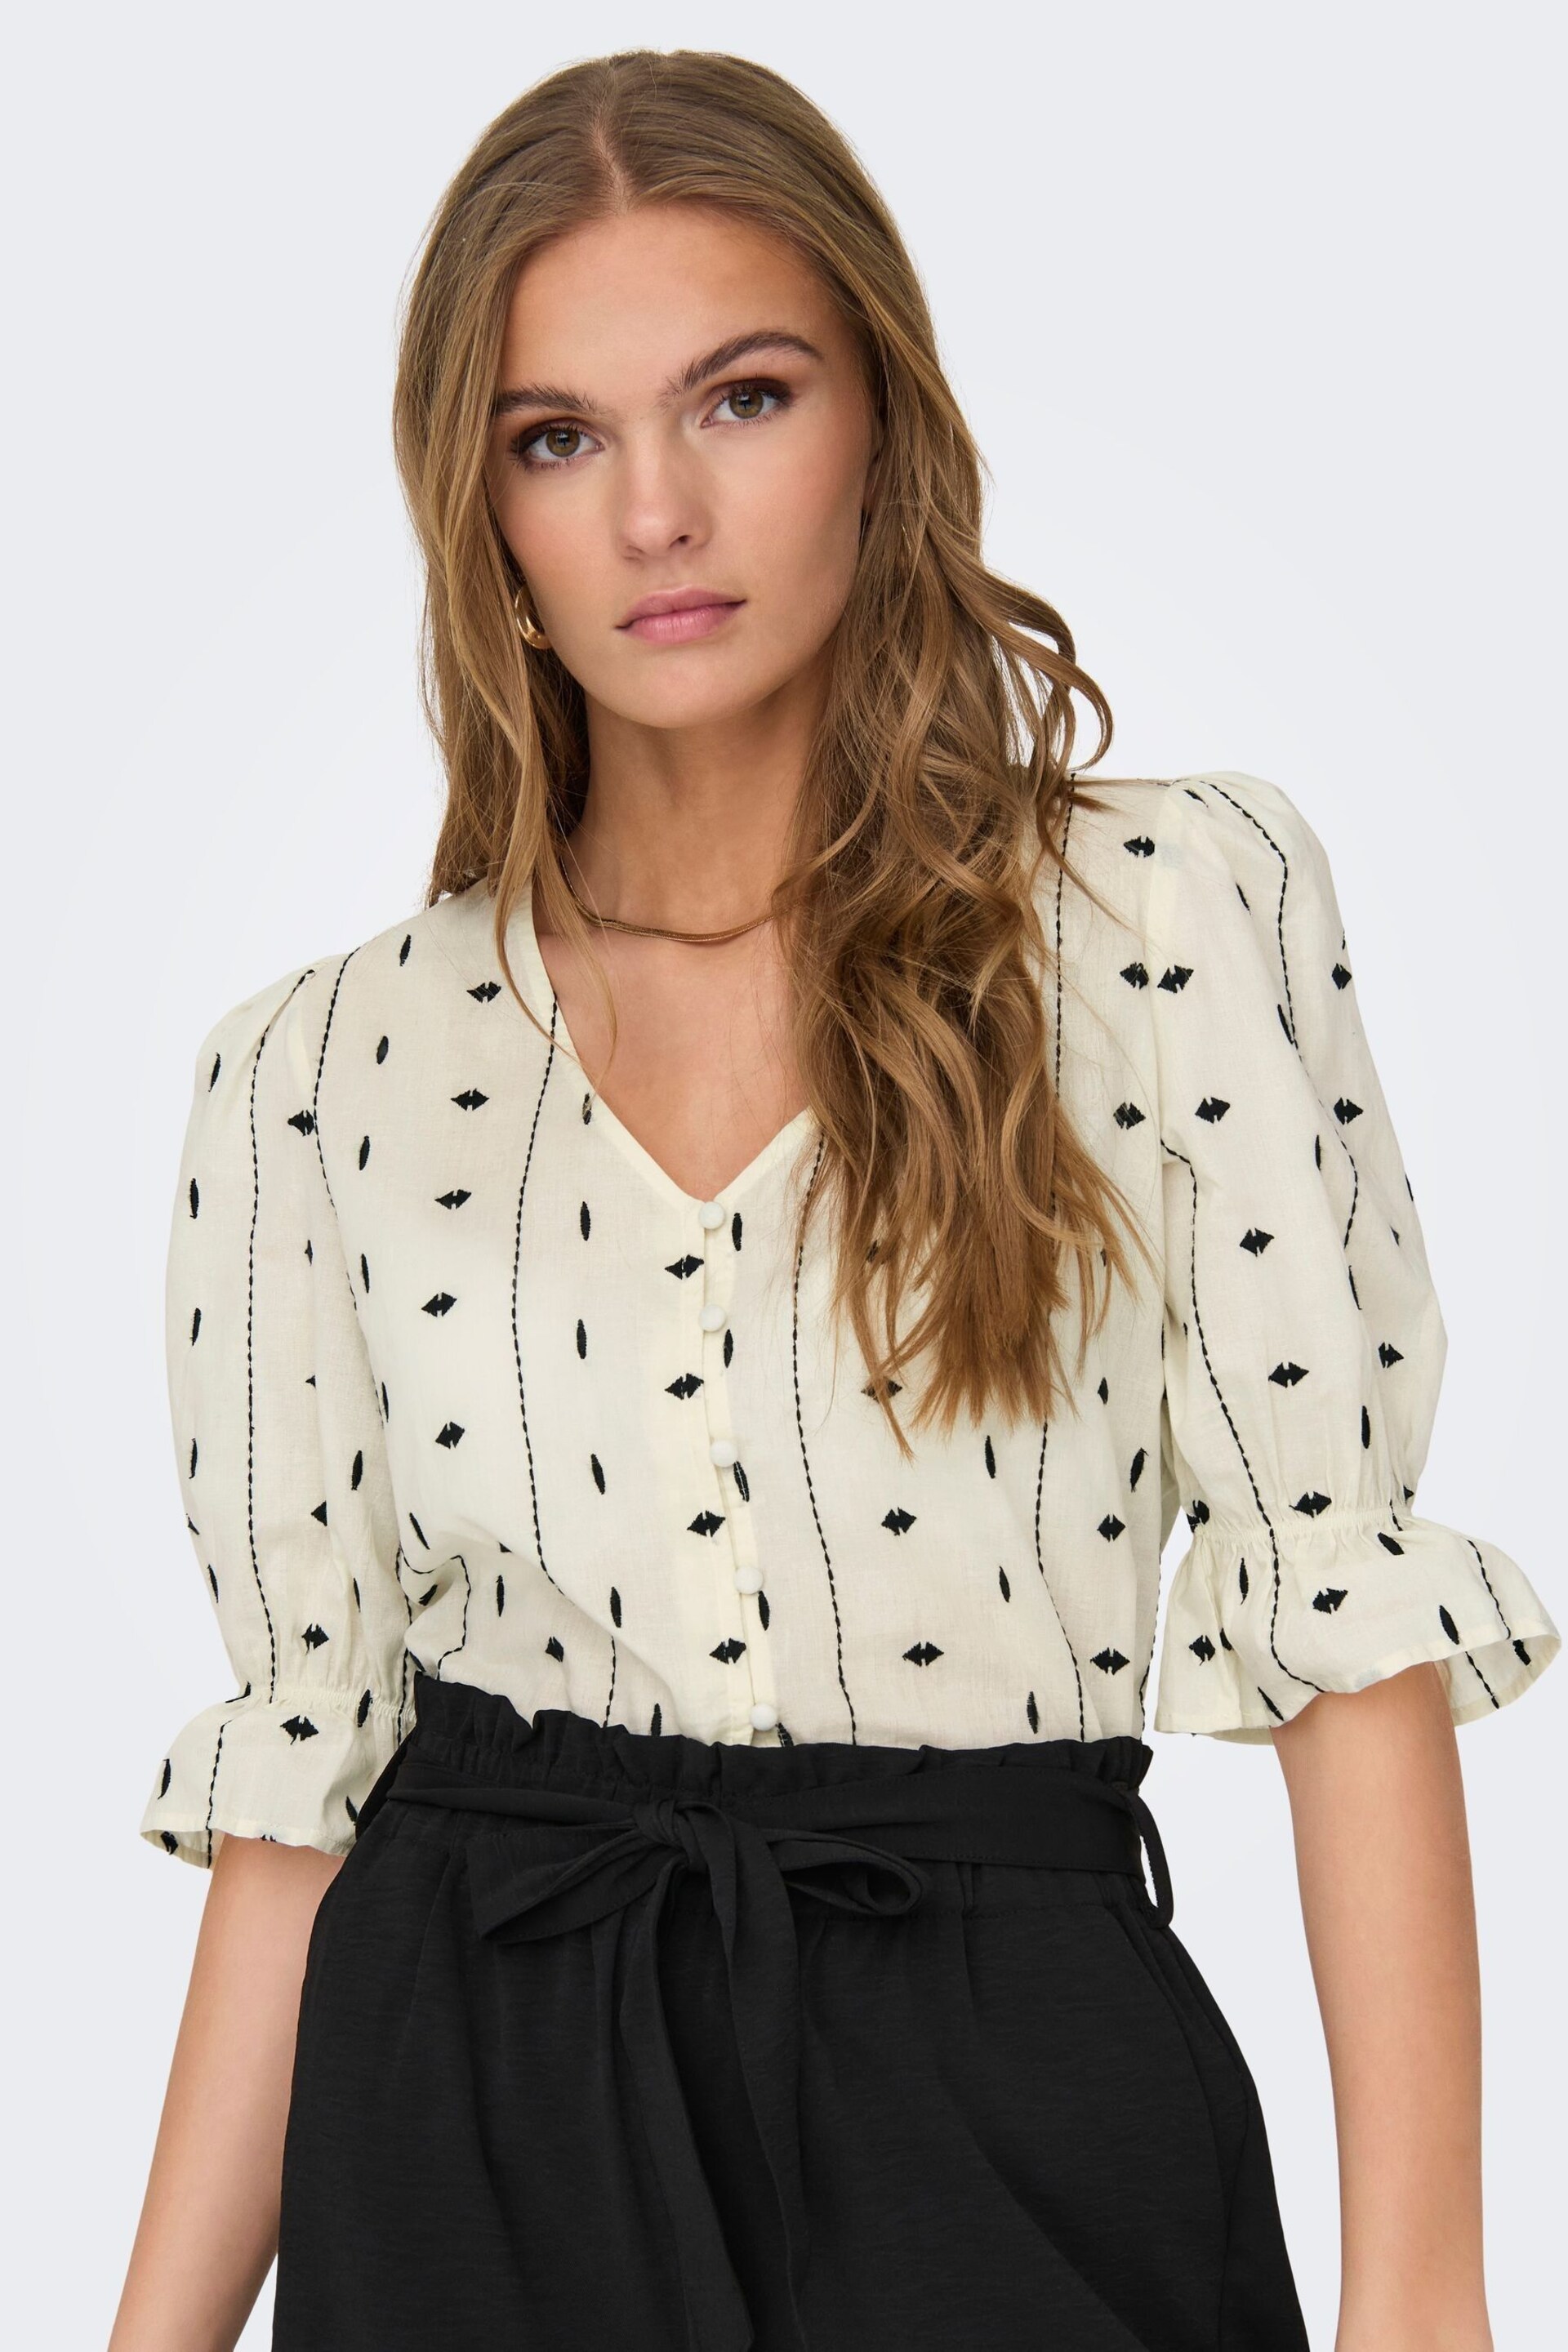 ONLY Cream Embroidered Short Sleeve Button Up Blouse - Image 4 of 8